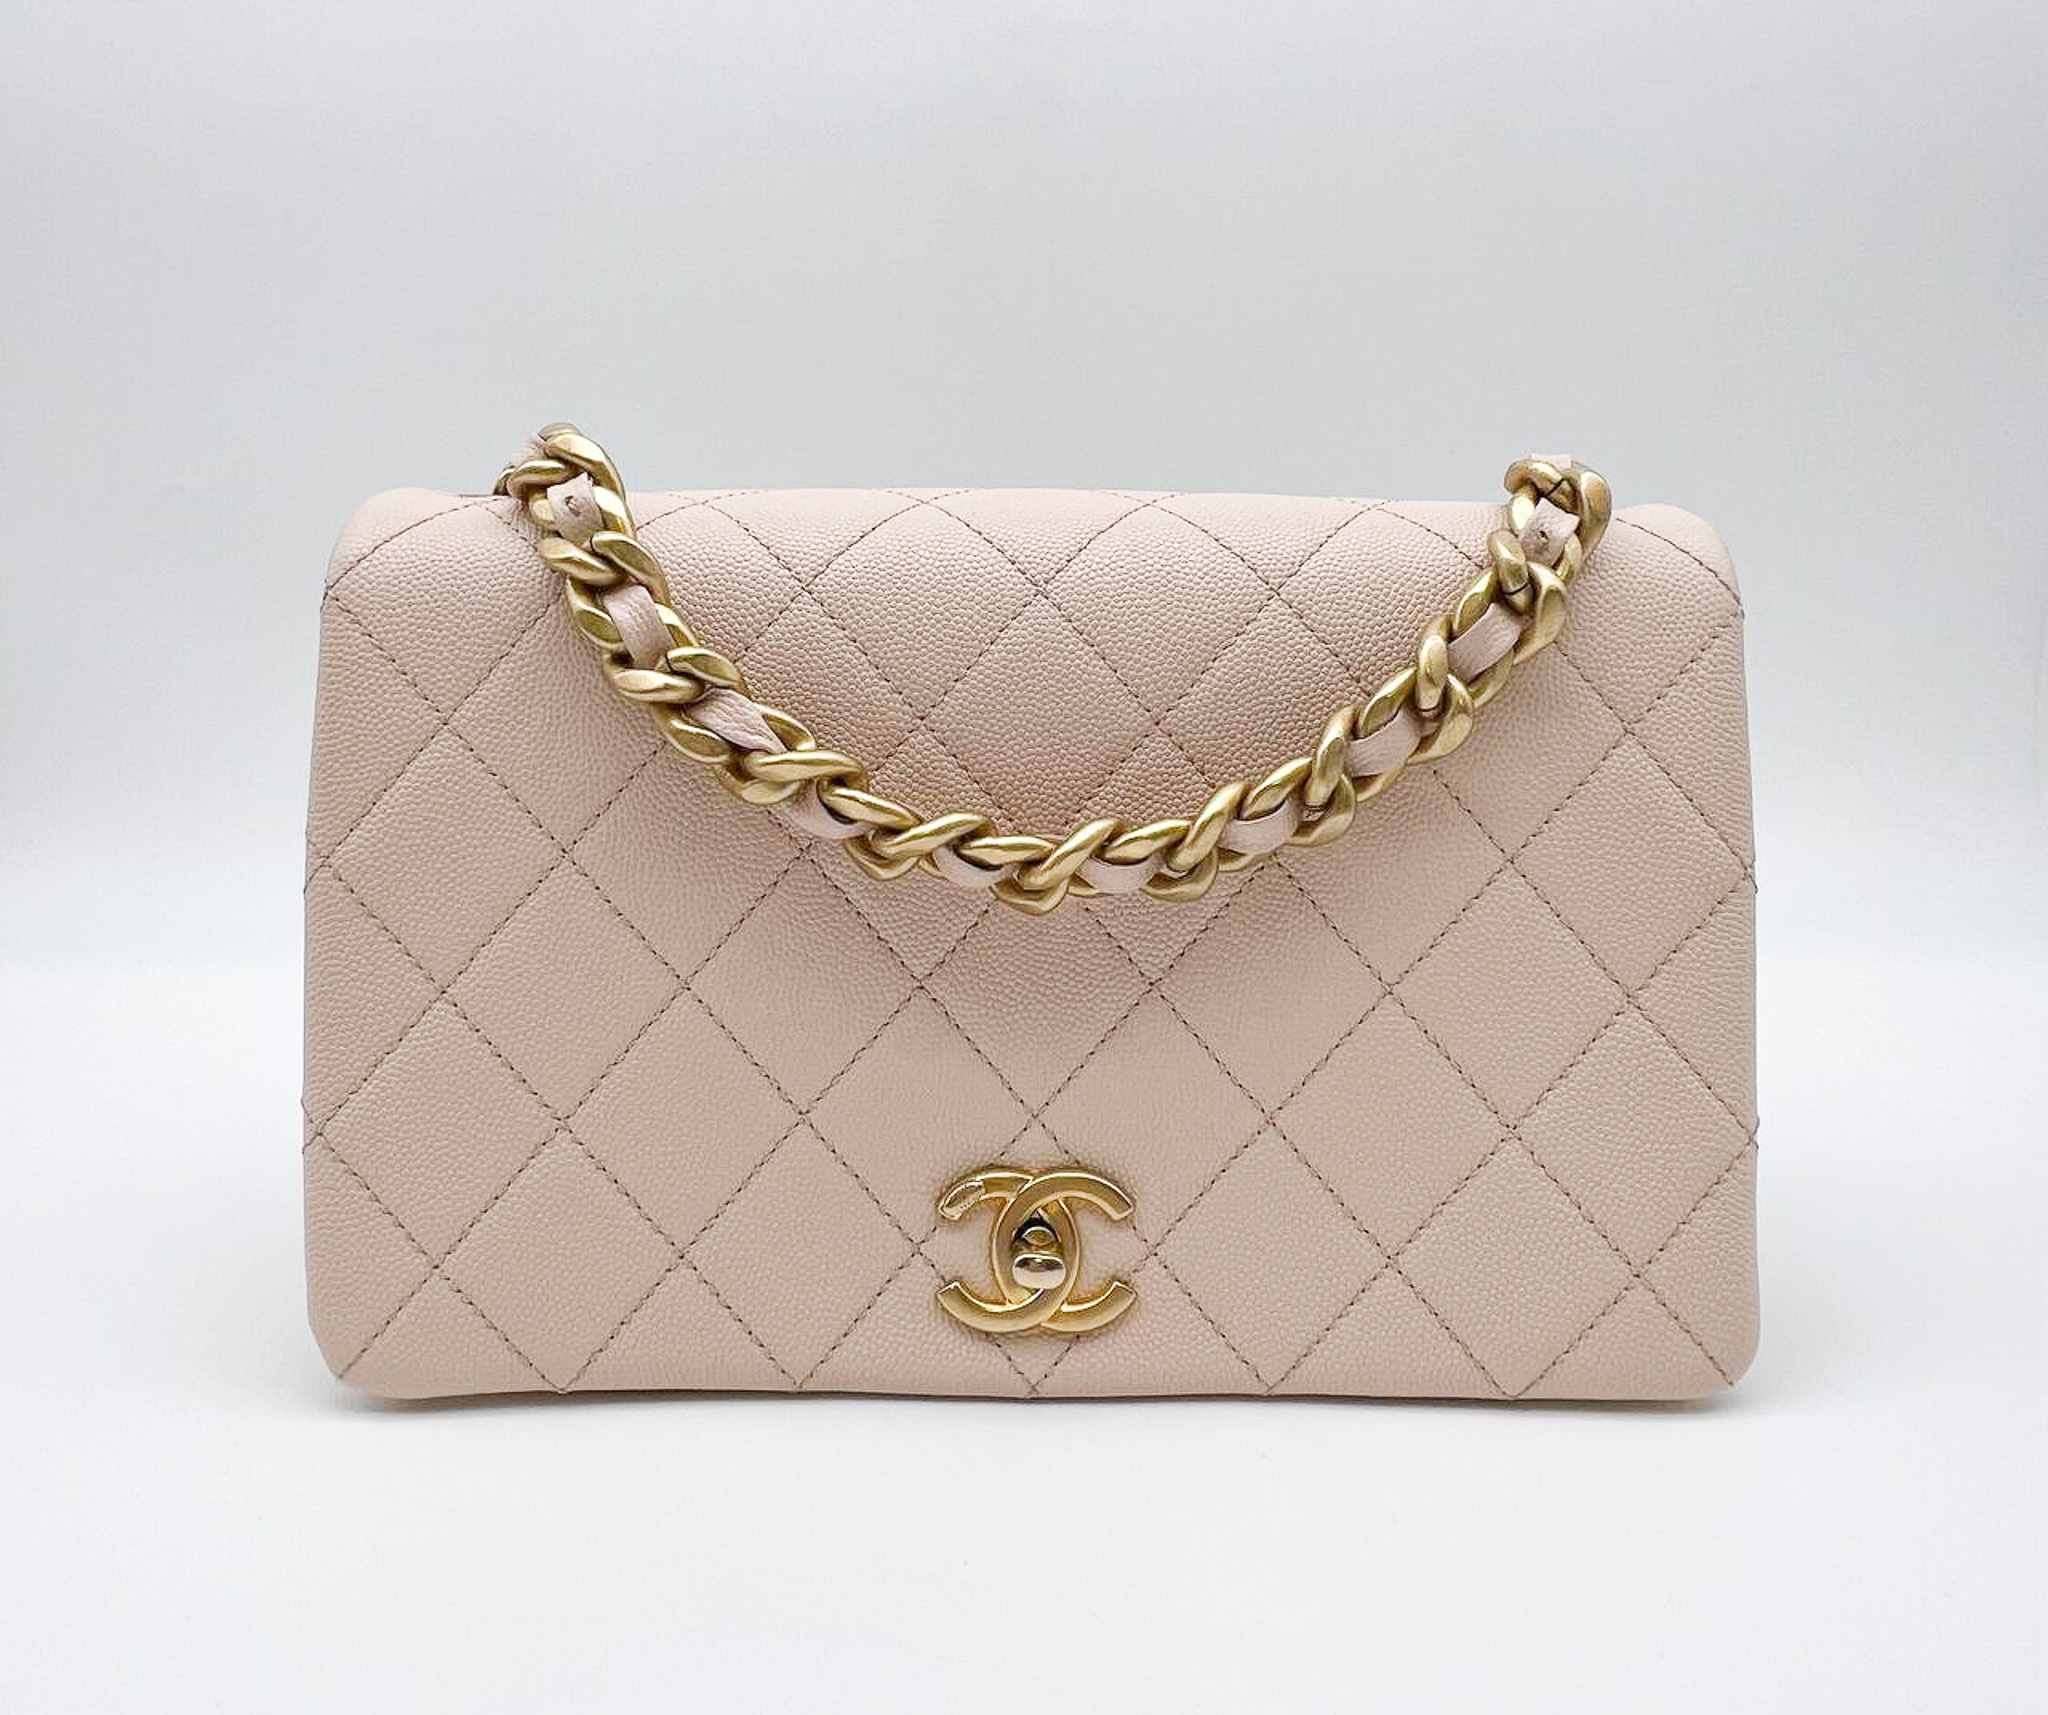 Chanel Vintage Beige, Lambskin, Quilted Classic, Medium, Gold Hardware,  Preowned No Dustbag WA001 - Julia Rose Boston